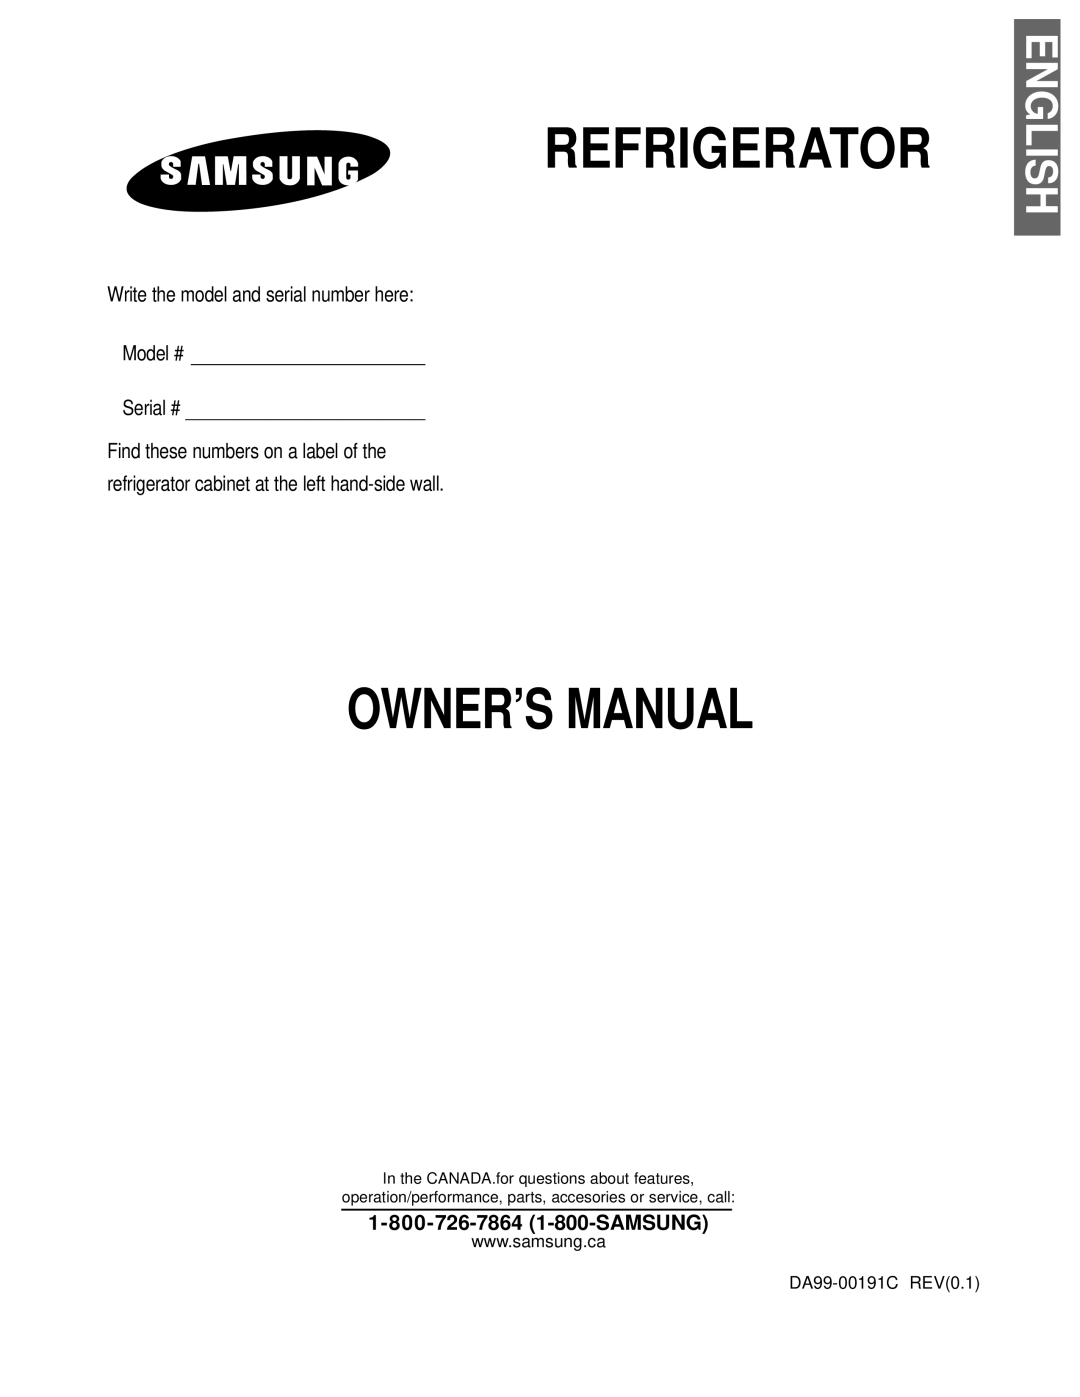 Samsung RB2055SL owner manual Write the model and serial number here Model # Serial #, Refrigerator, Owner’S Manual 